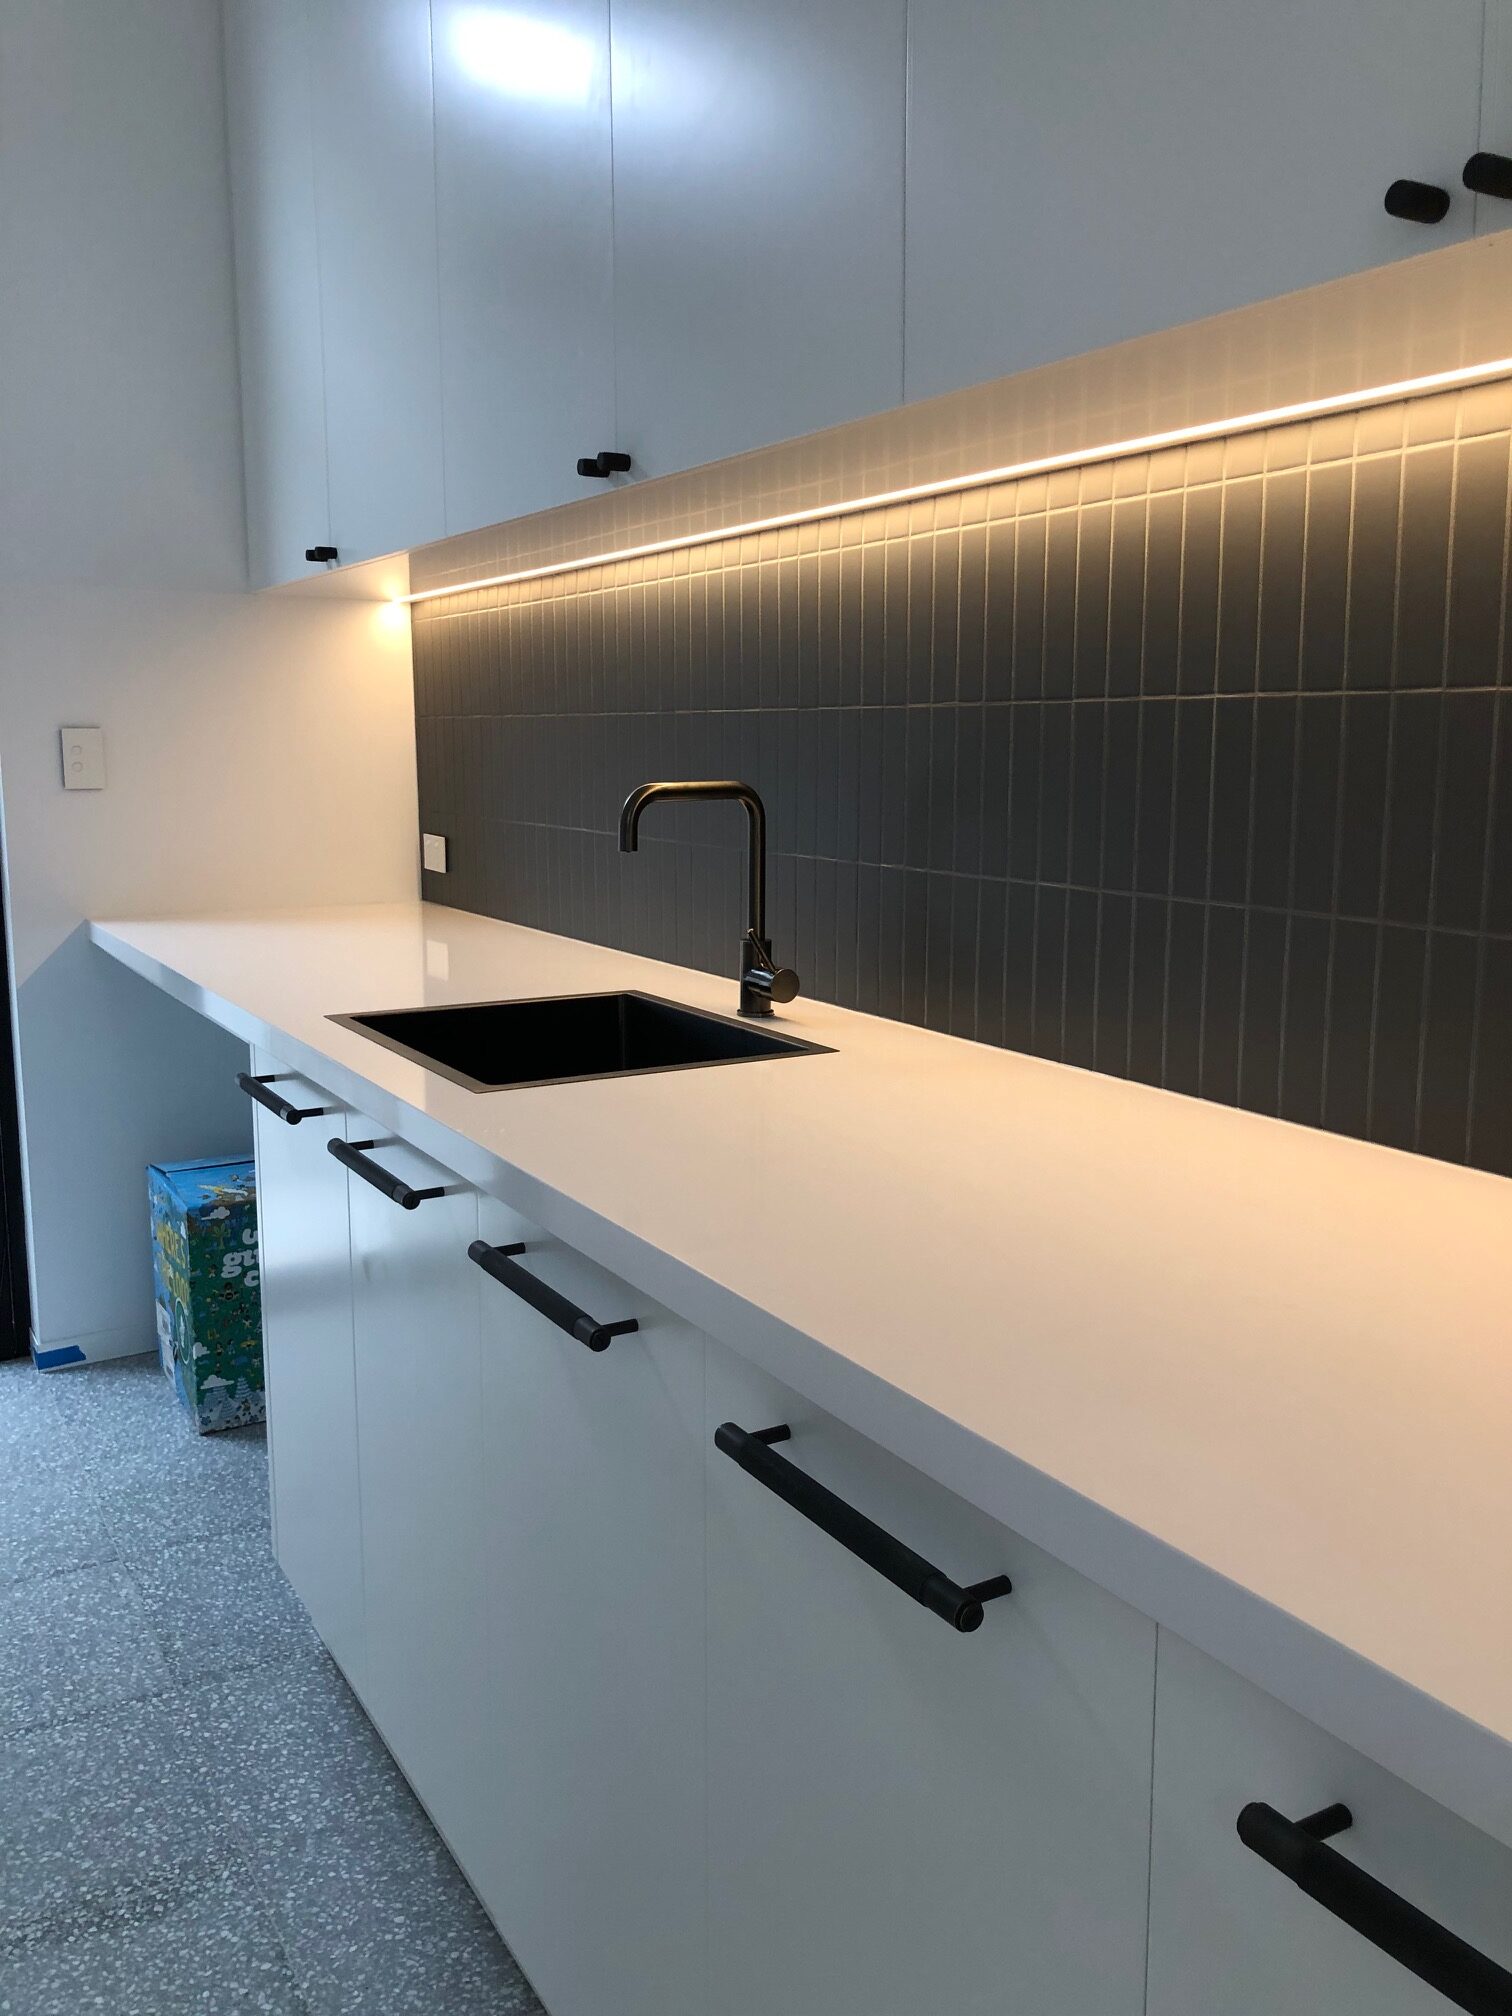 reliable LED bench lighting installations for your kitchen.